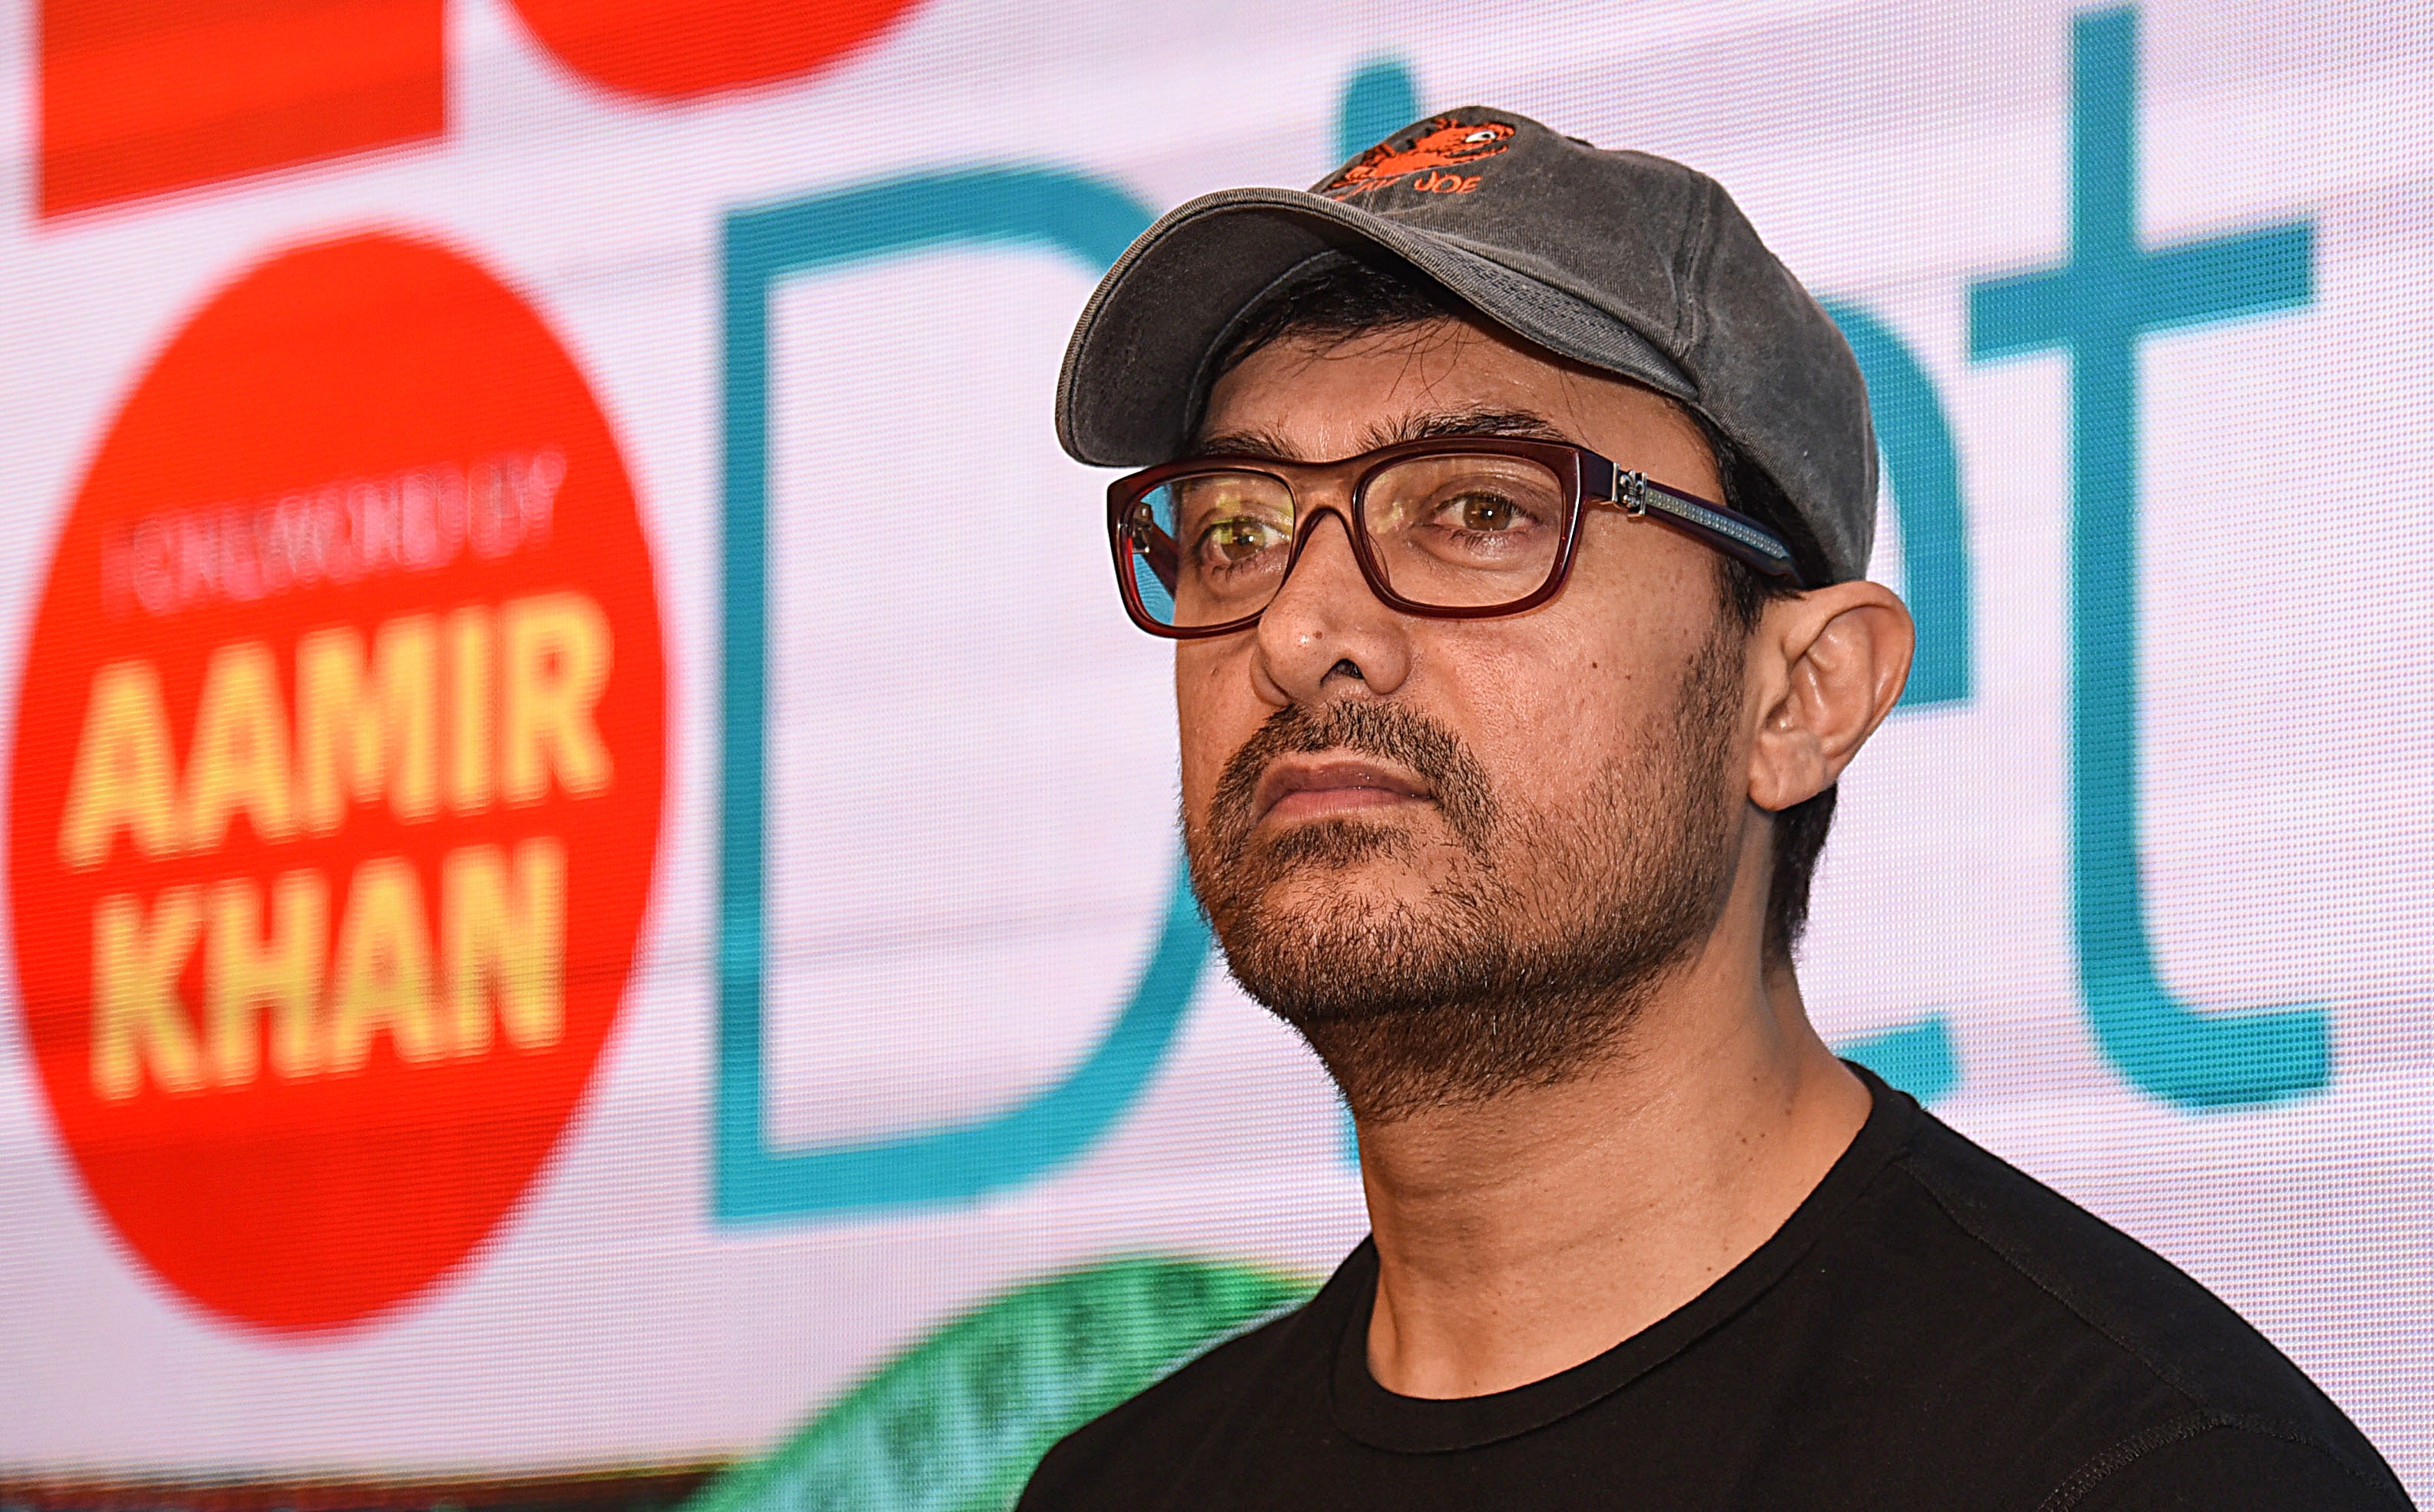 Aamir Khan features in an advertisement that shows a gender-swapped observation of a Hindu wedding ritual